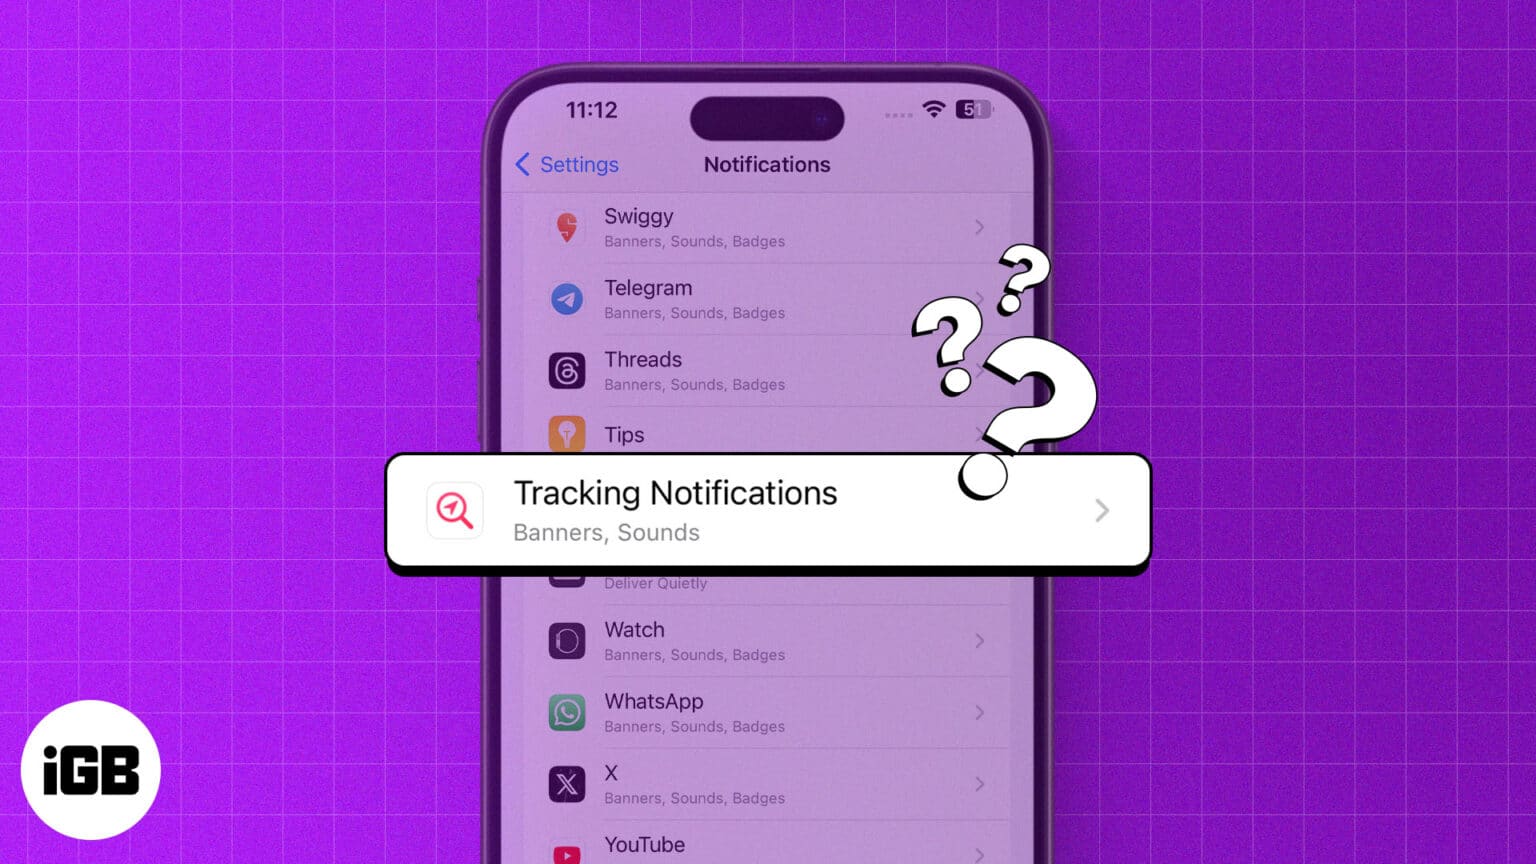 What is Tracking Notifications on iPhone